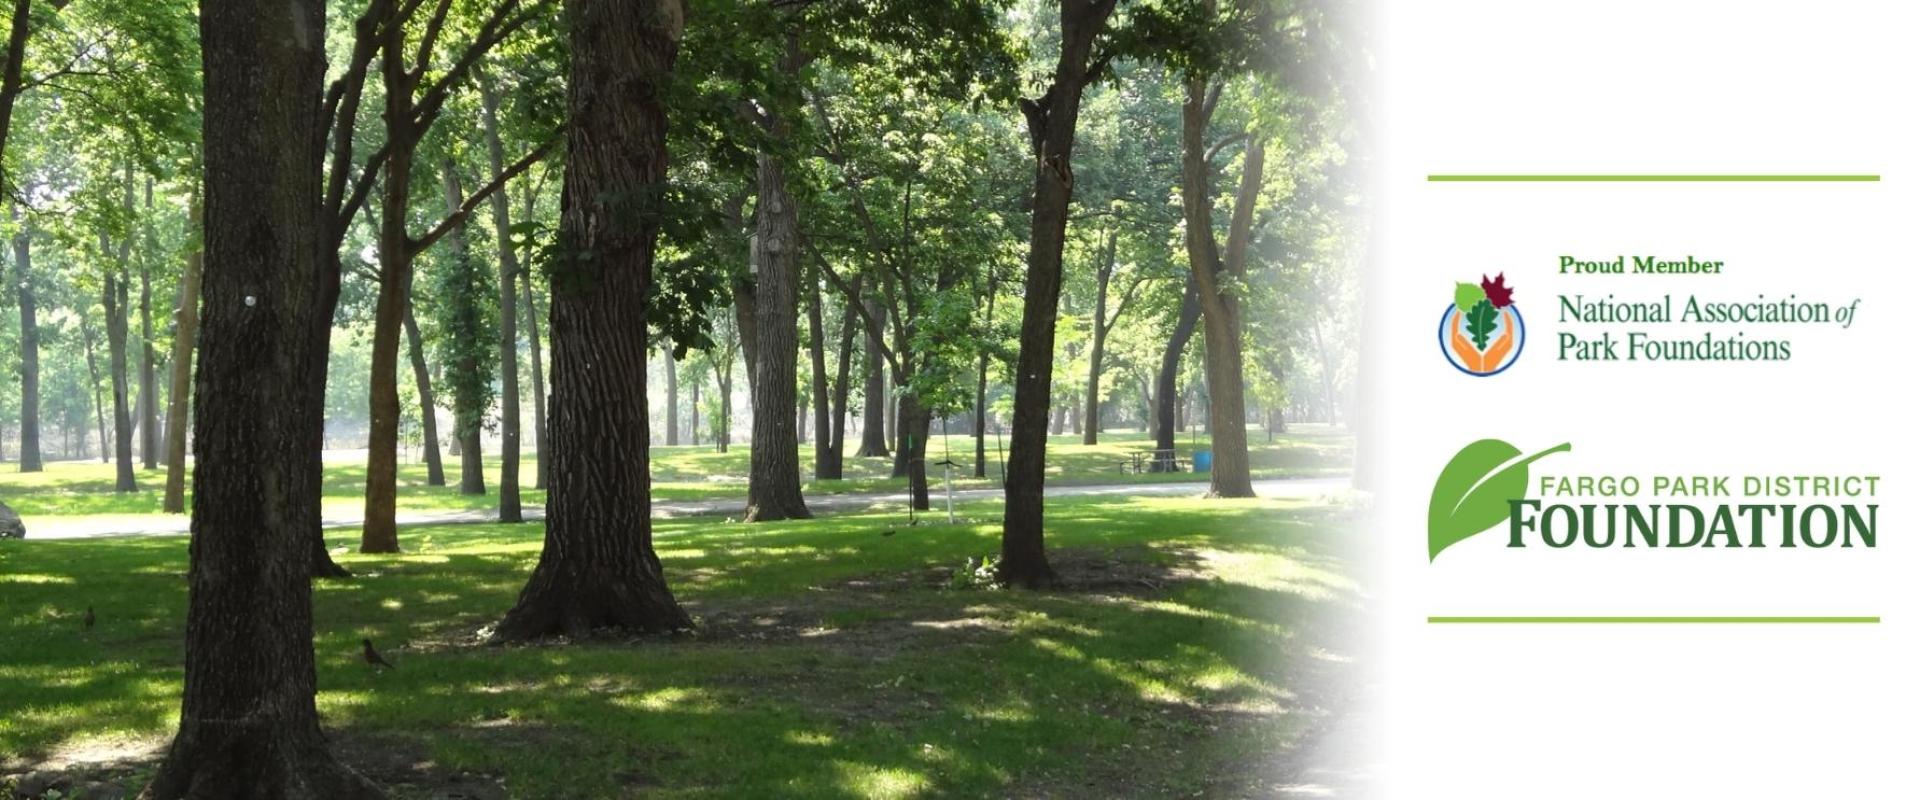 This photo shows Oak Grove Park with trees and a path along with the Fargo Park District Foundation logo and the National Association of Park Foundations logo